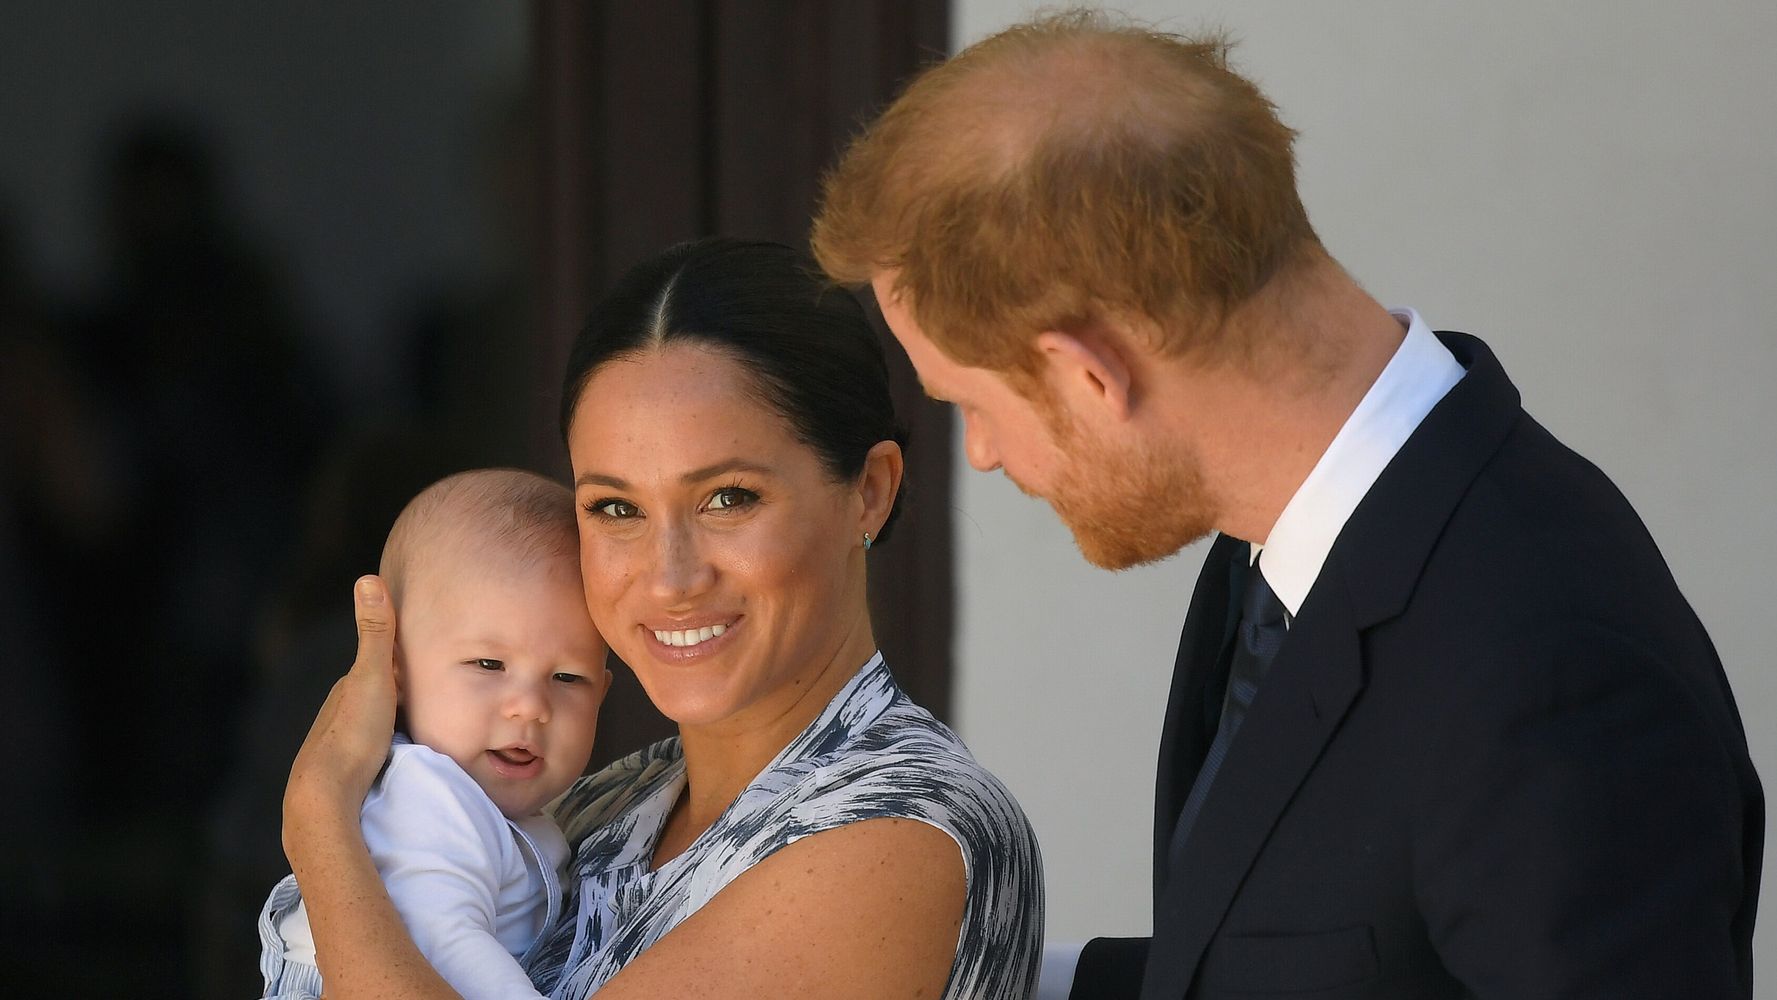 Archie Megan creates an amazing guest appearance on Markle and Prince Harry’s first podcast